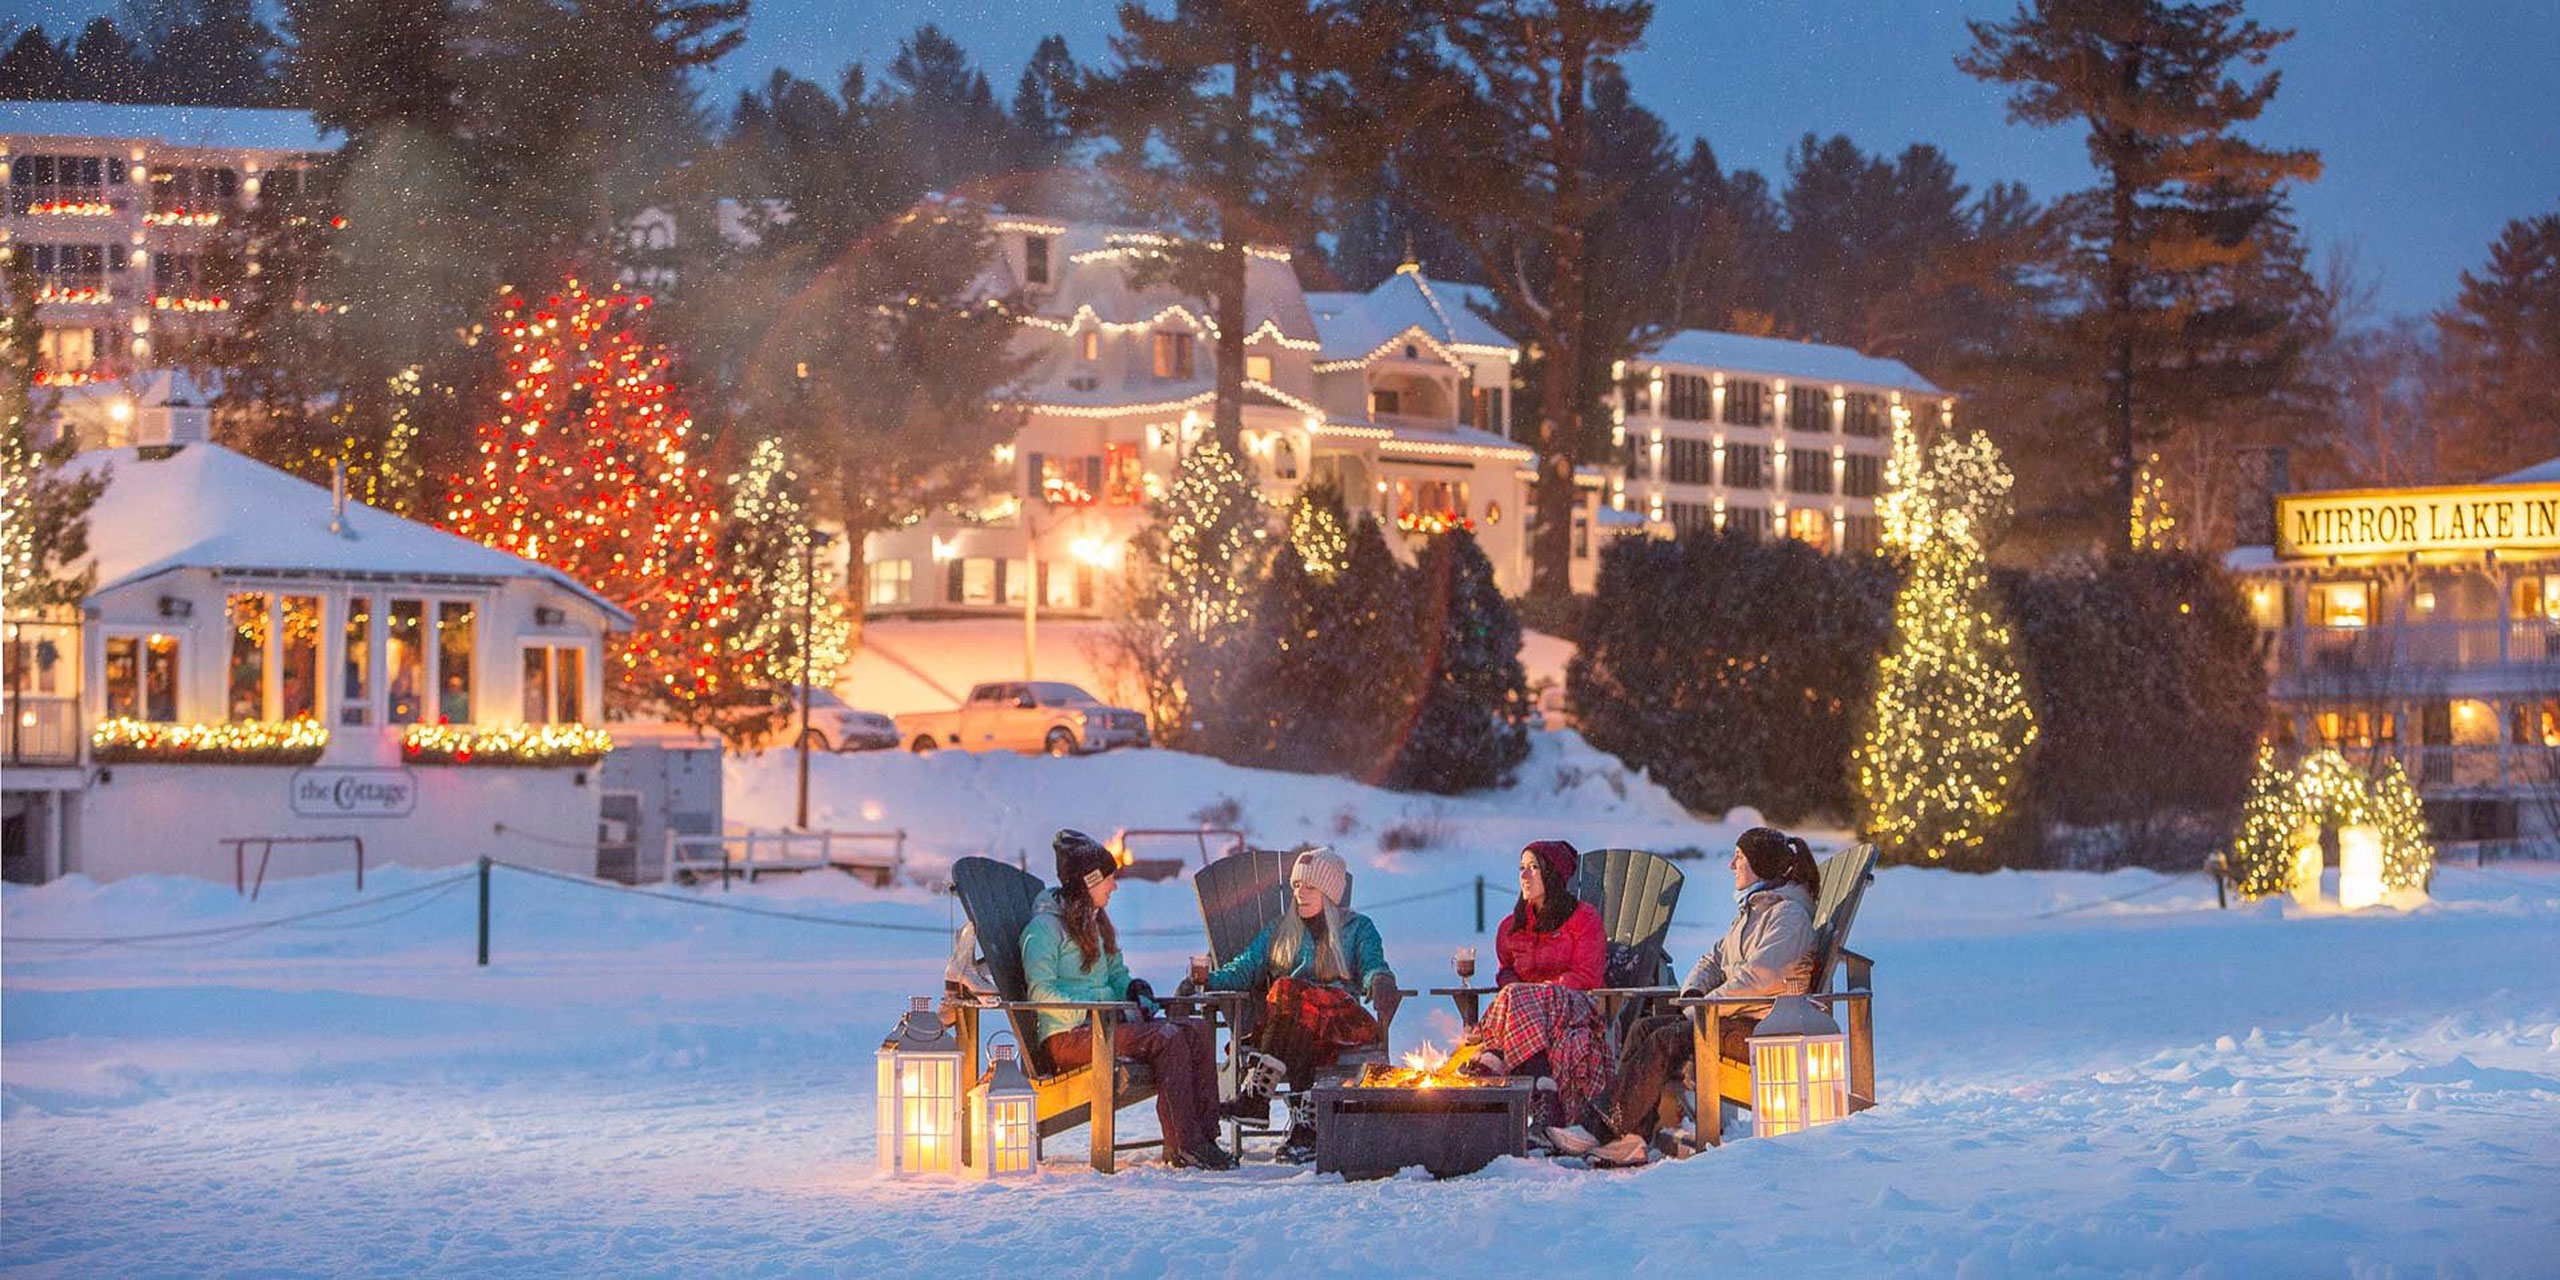 19 Magical Hotels For The Holiday Season 19 Family Vacation Critic